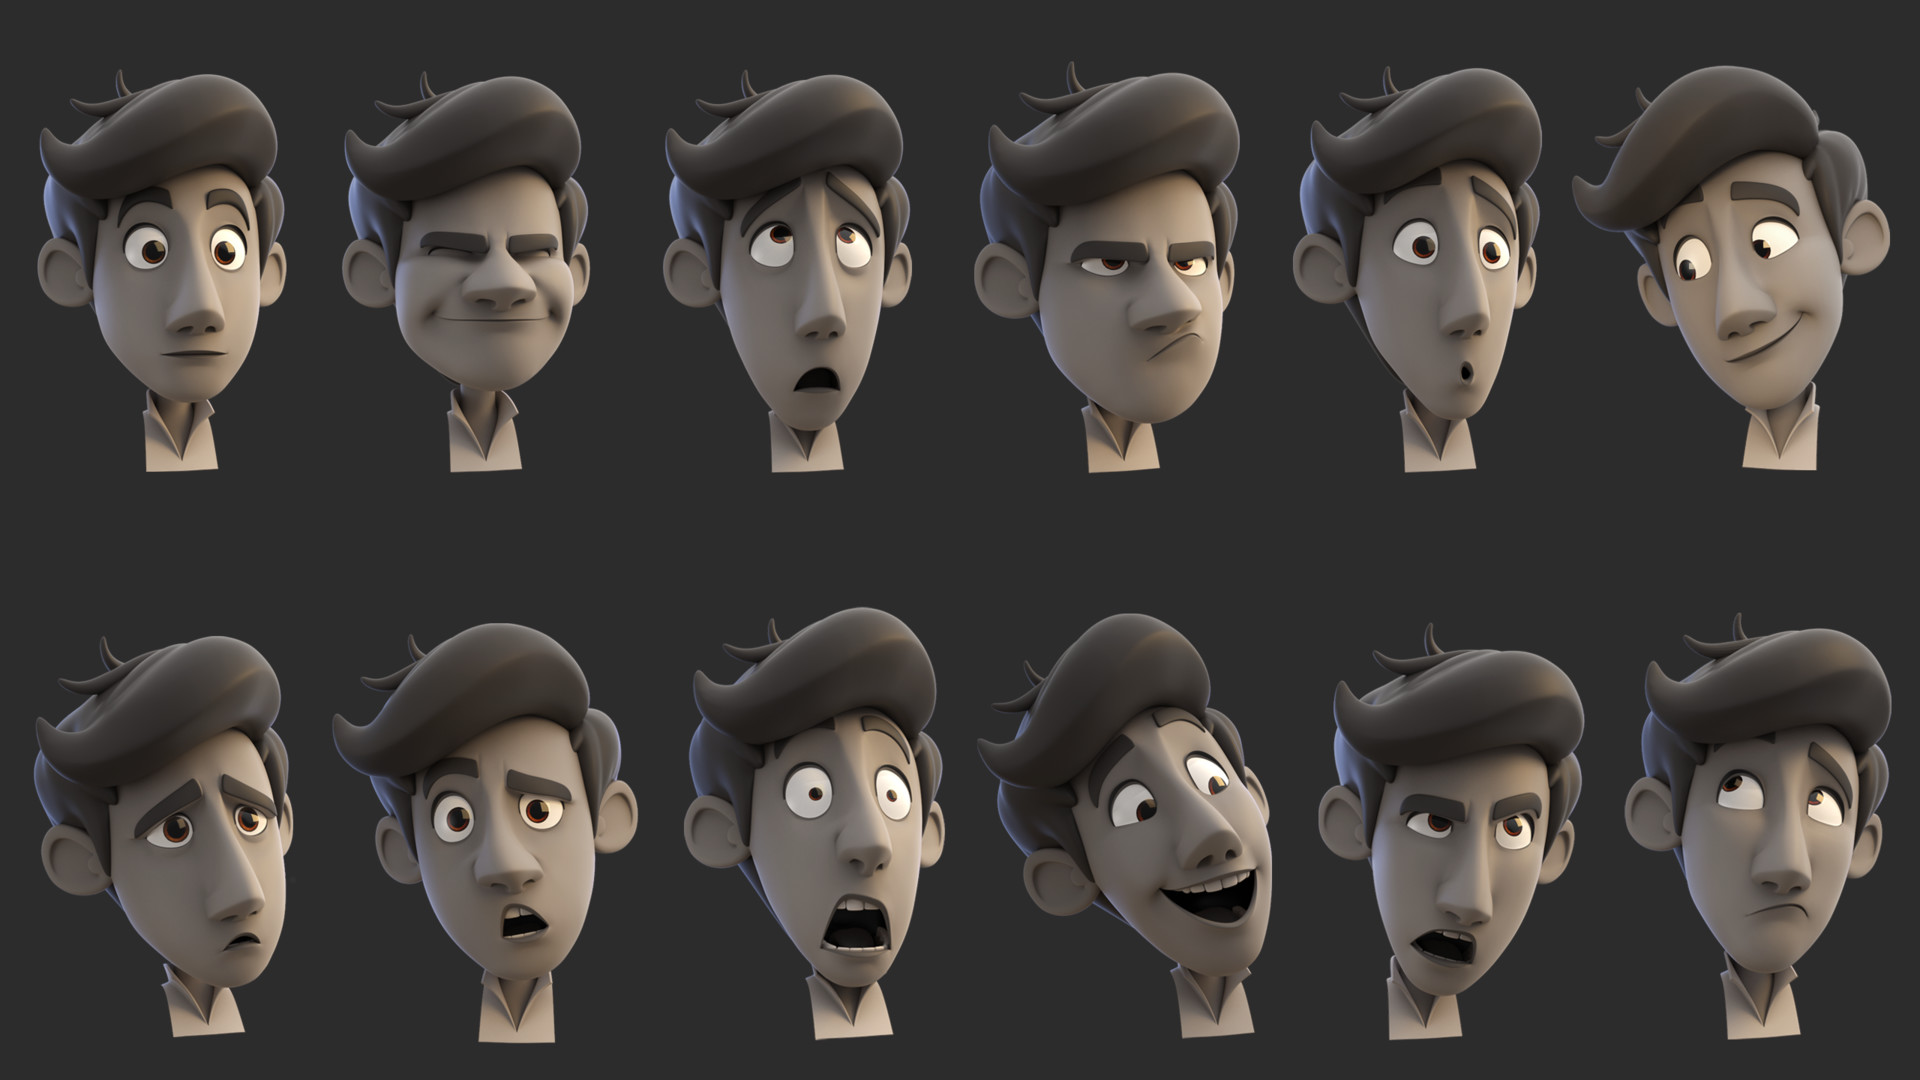 Facial animation and rig in 3D - Animation, Rigging, 2D animation, 3D animation, 3D, Cartoons, GIF, Video, Longpost